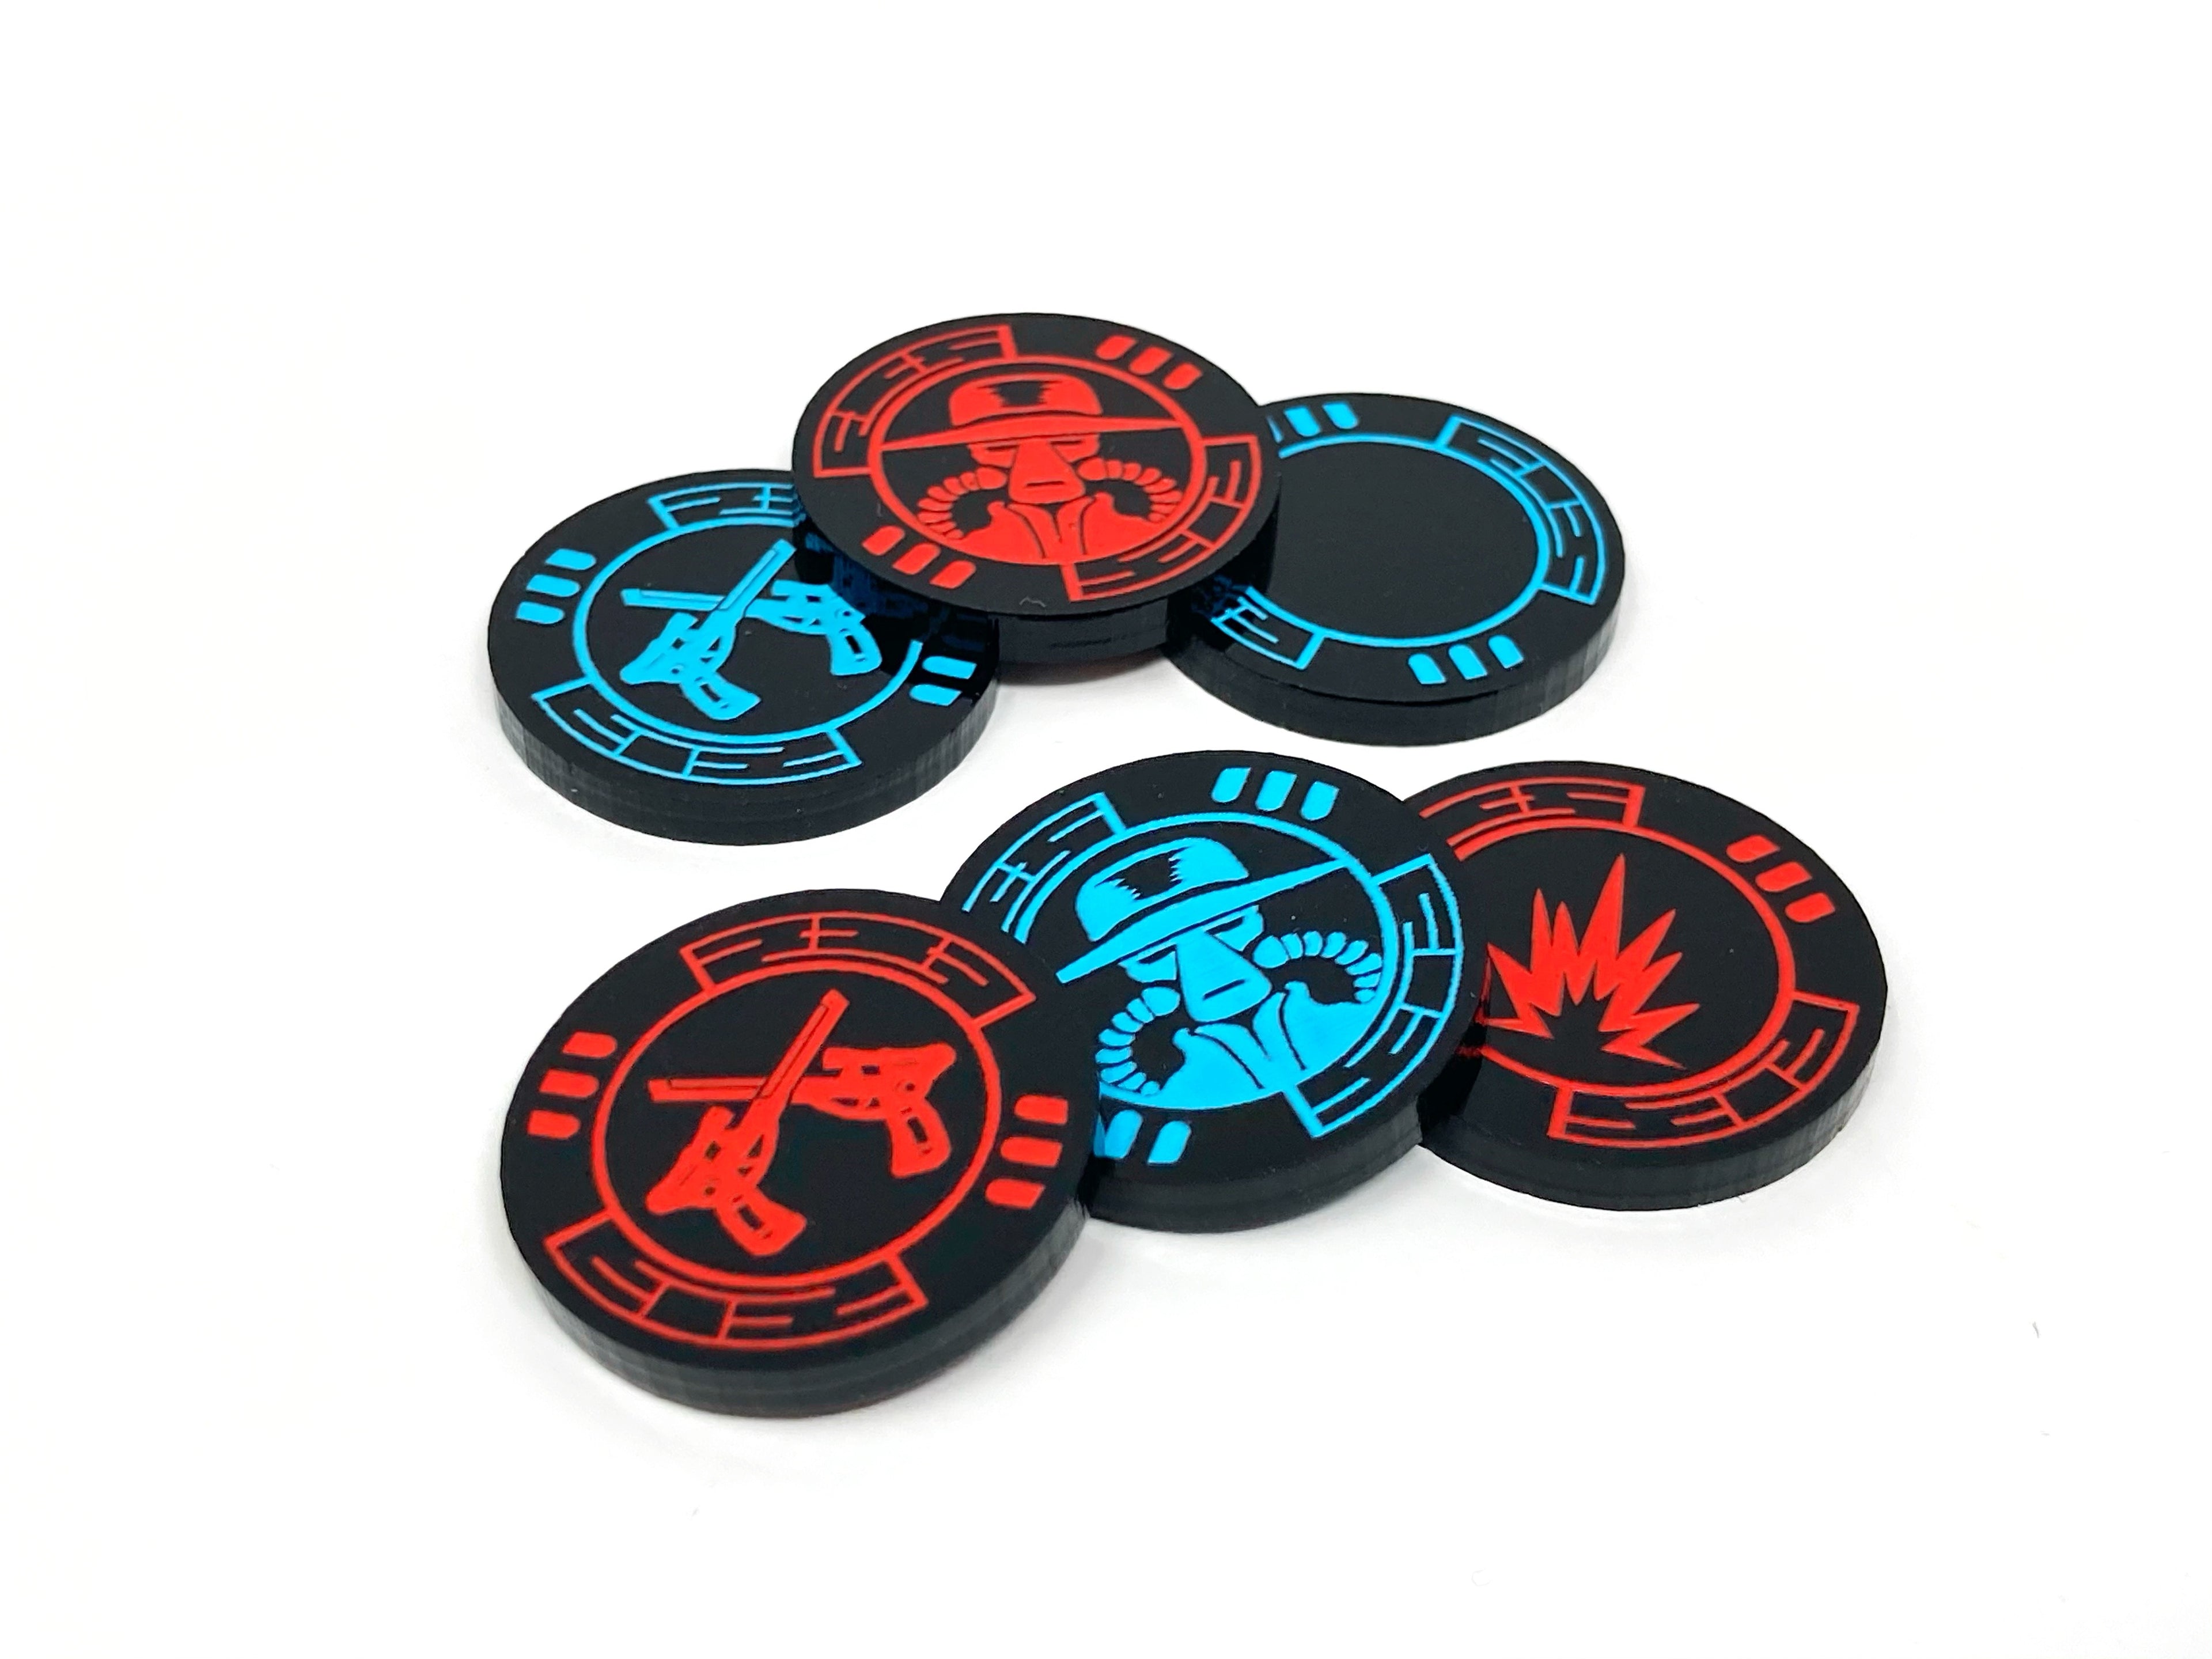 6 x Cad Bane tokens (double sided) for SW Legion